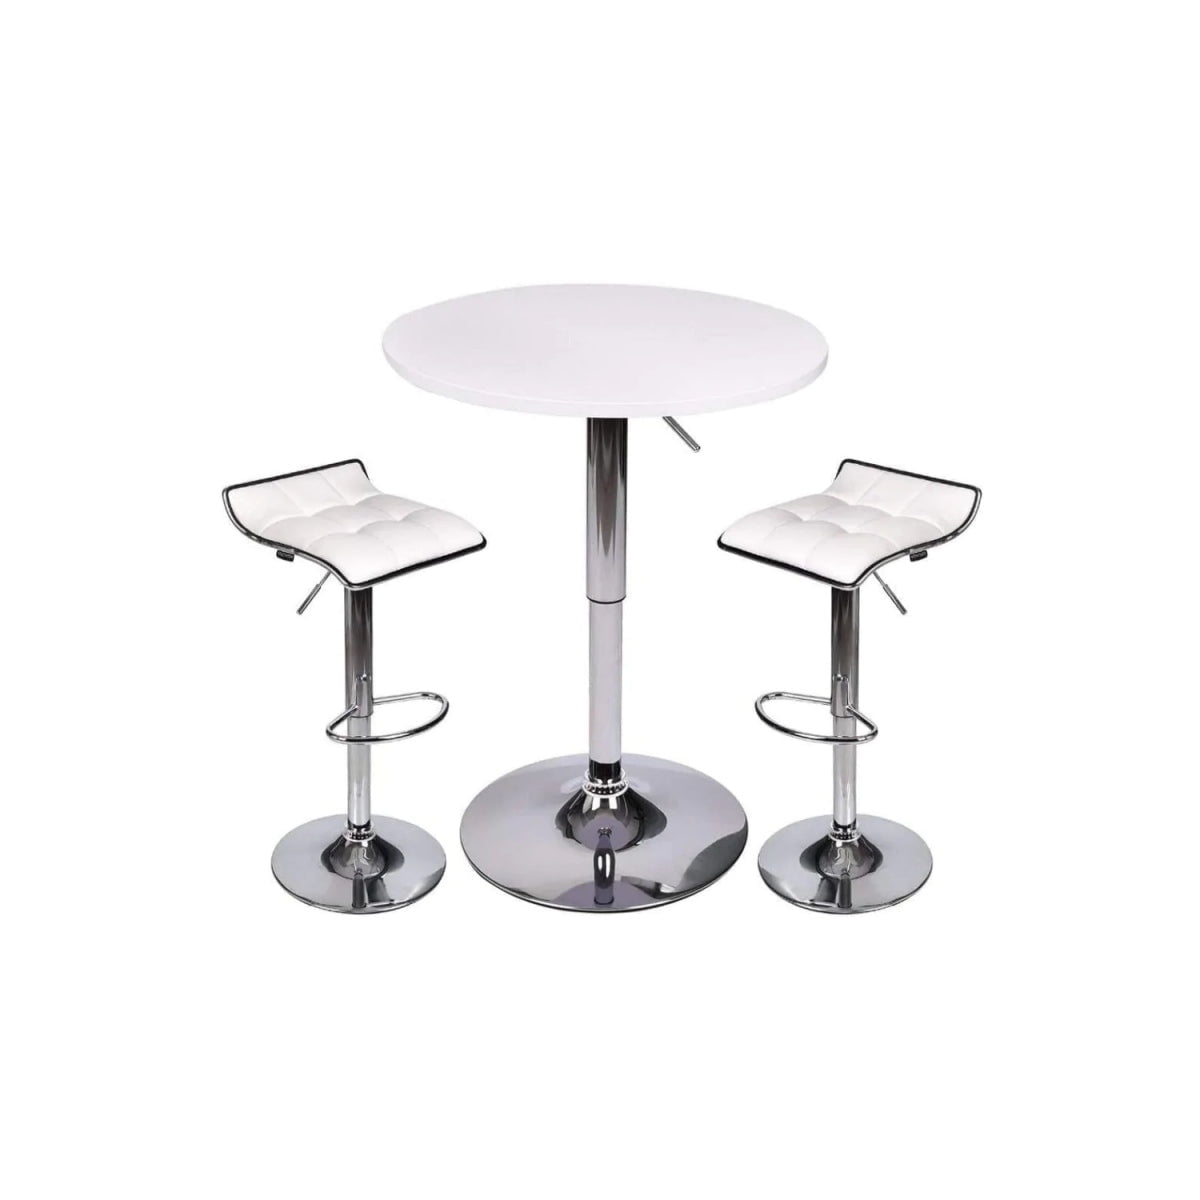 Elecwish White Bar Table with Two Grid White Bar Stools Set 3-Piece OW0306